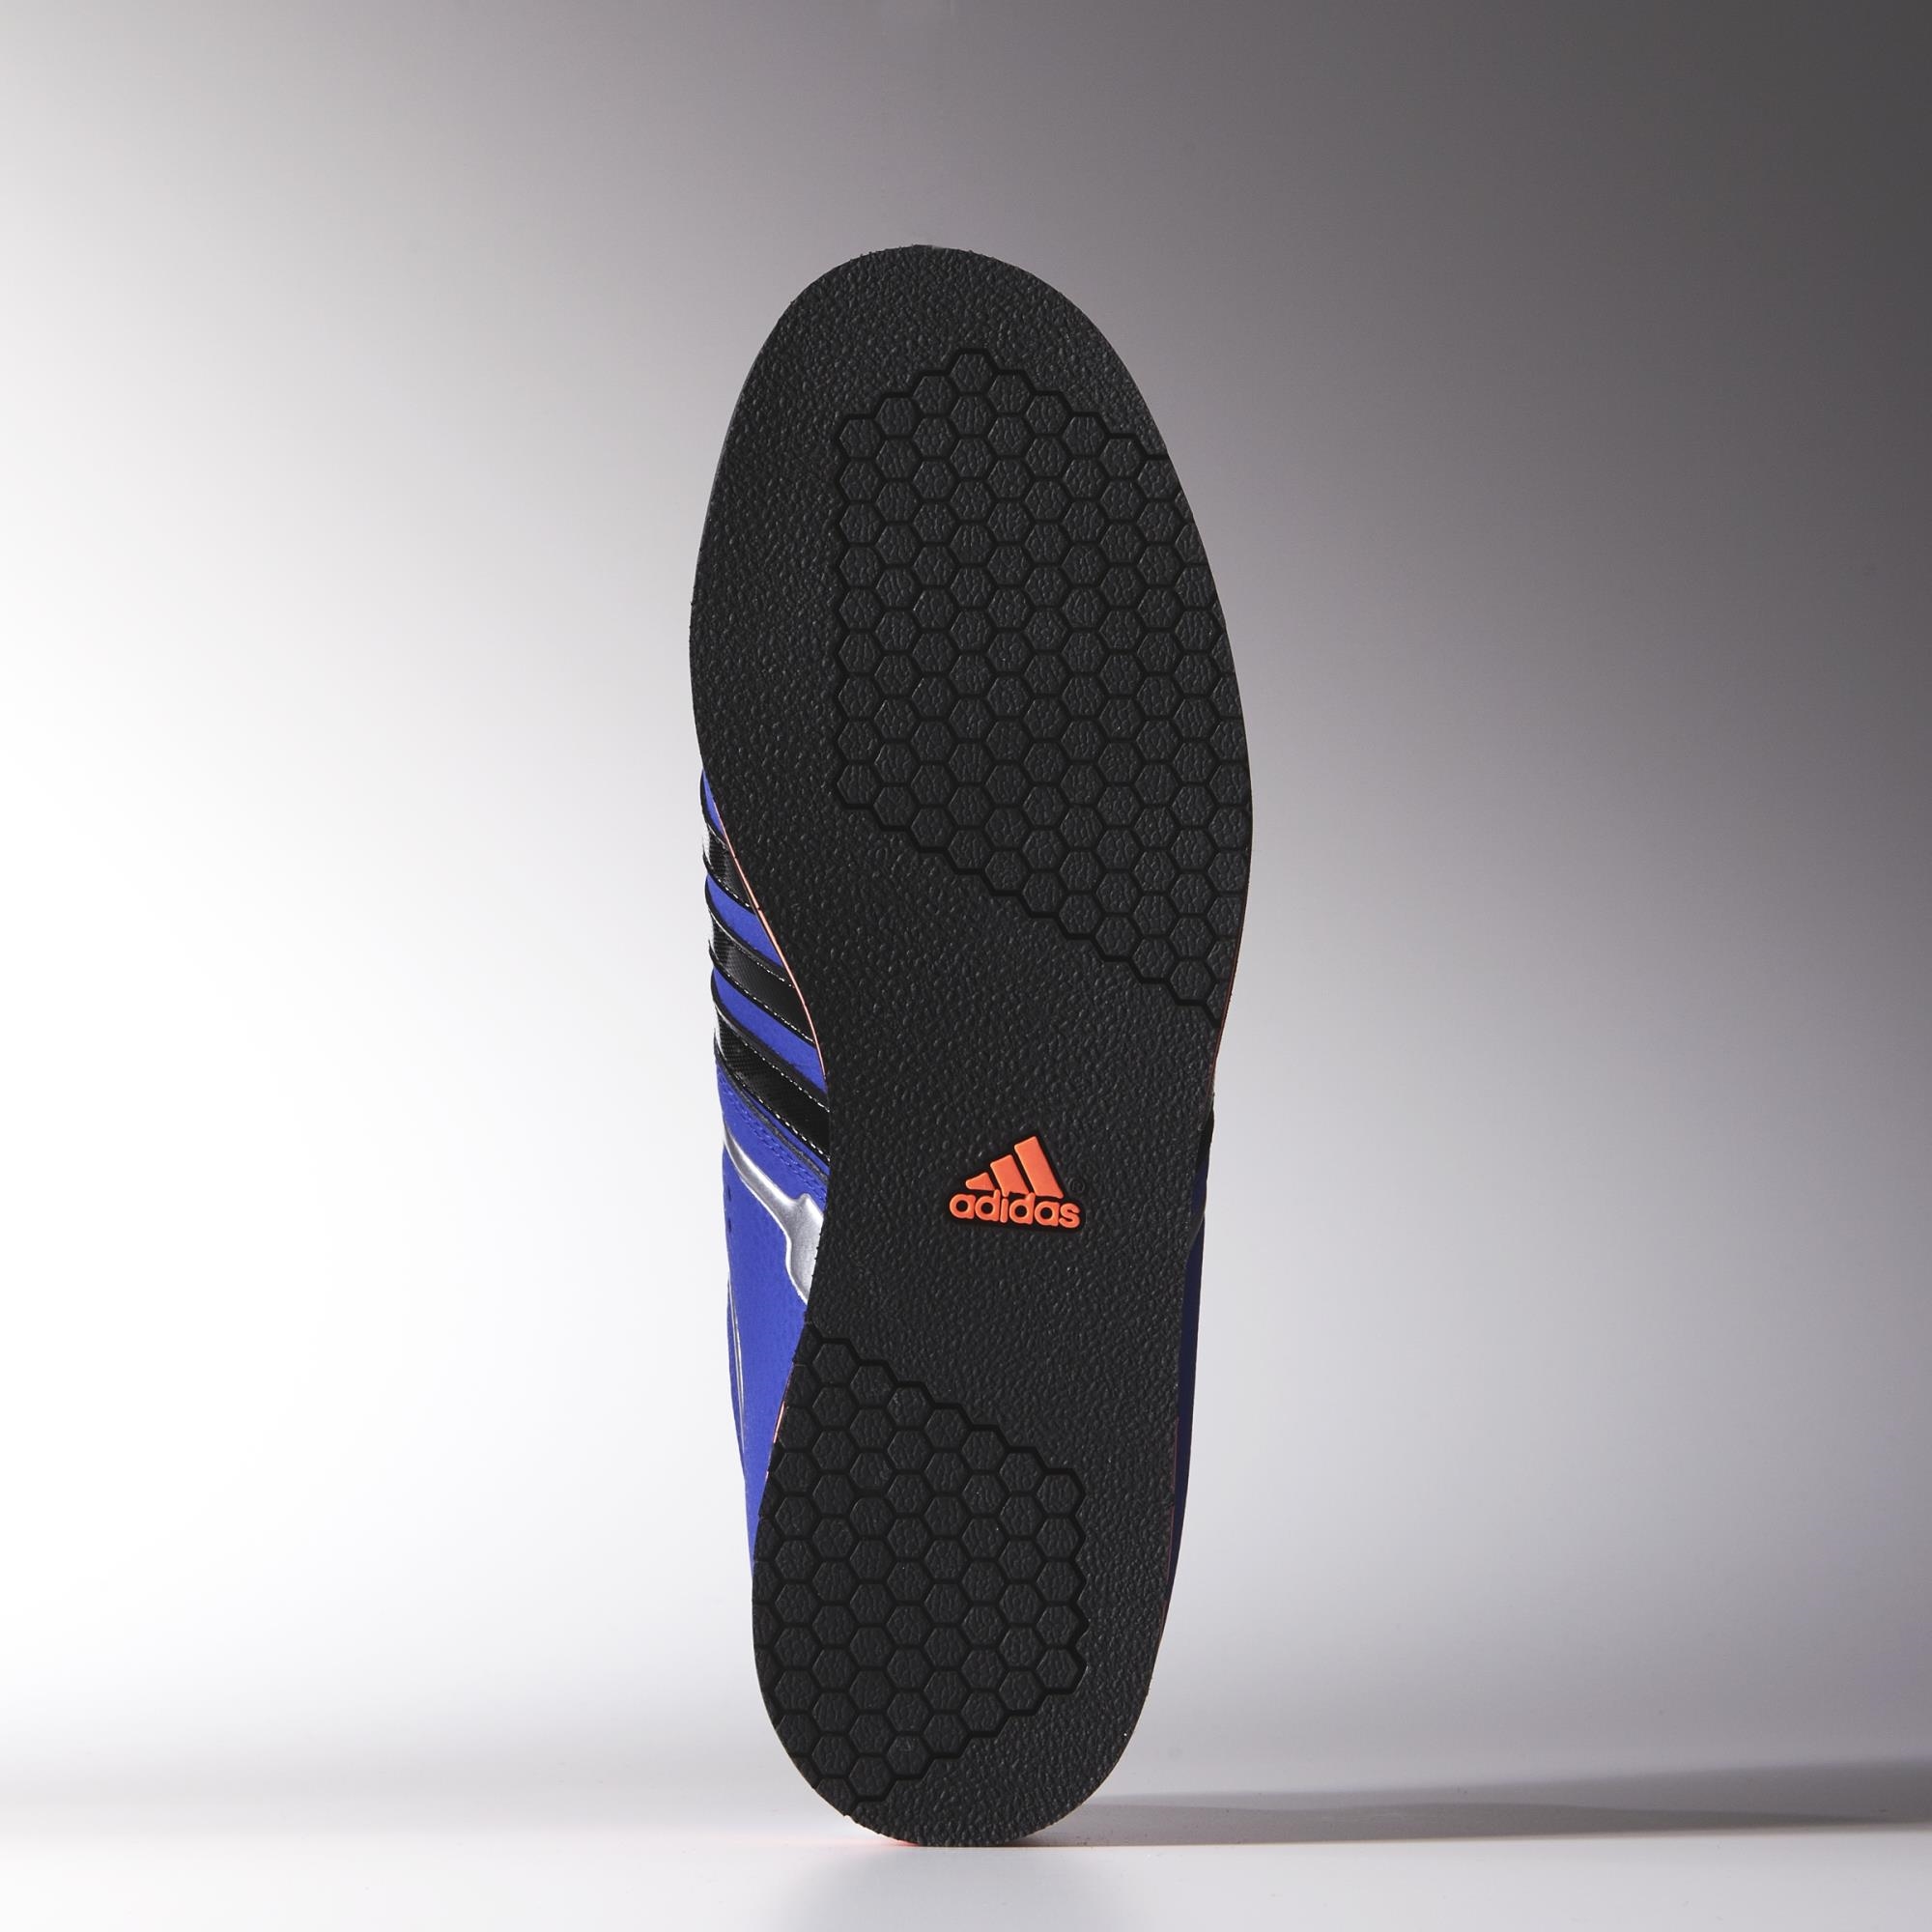 Adidas Powerlift 2.0 - Blue - Weightlifting Shoes - sole